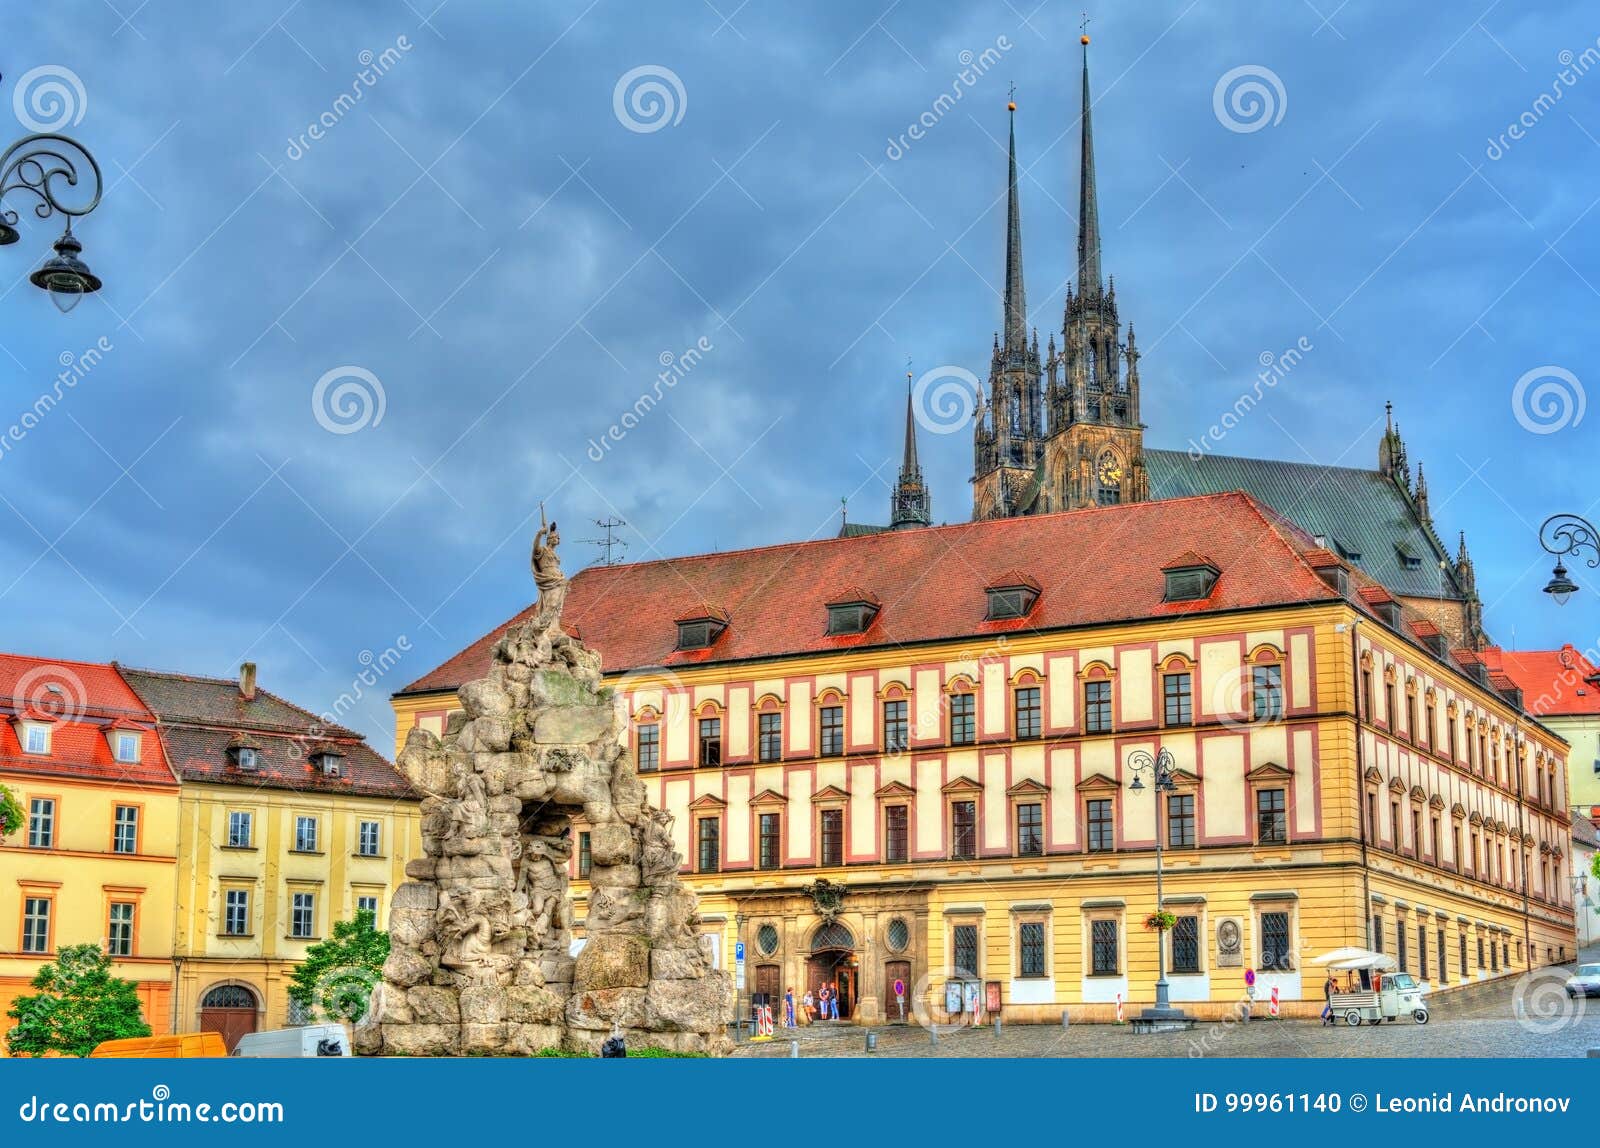 parnas fountain on zerny trh square in the old town of brno, czech republic